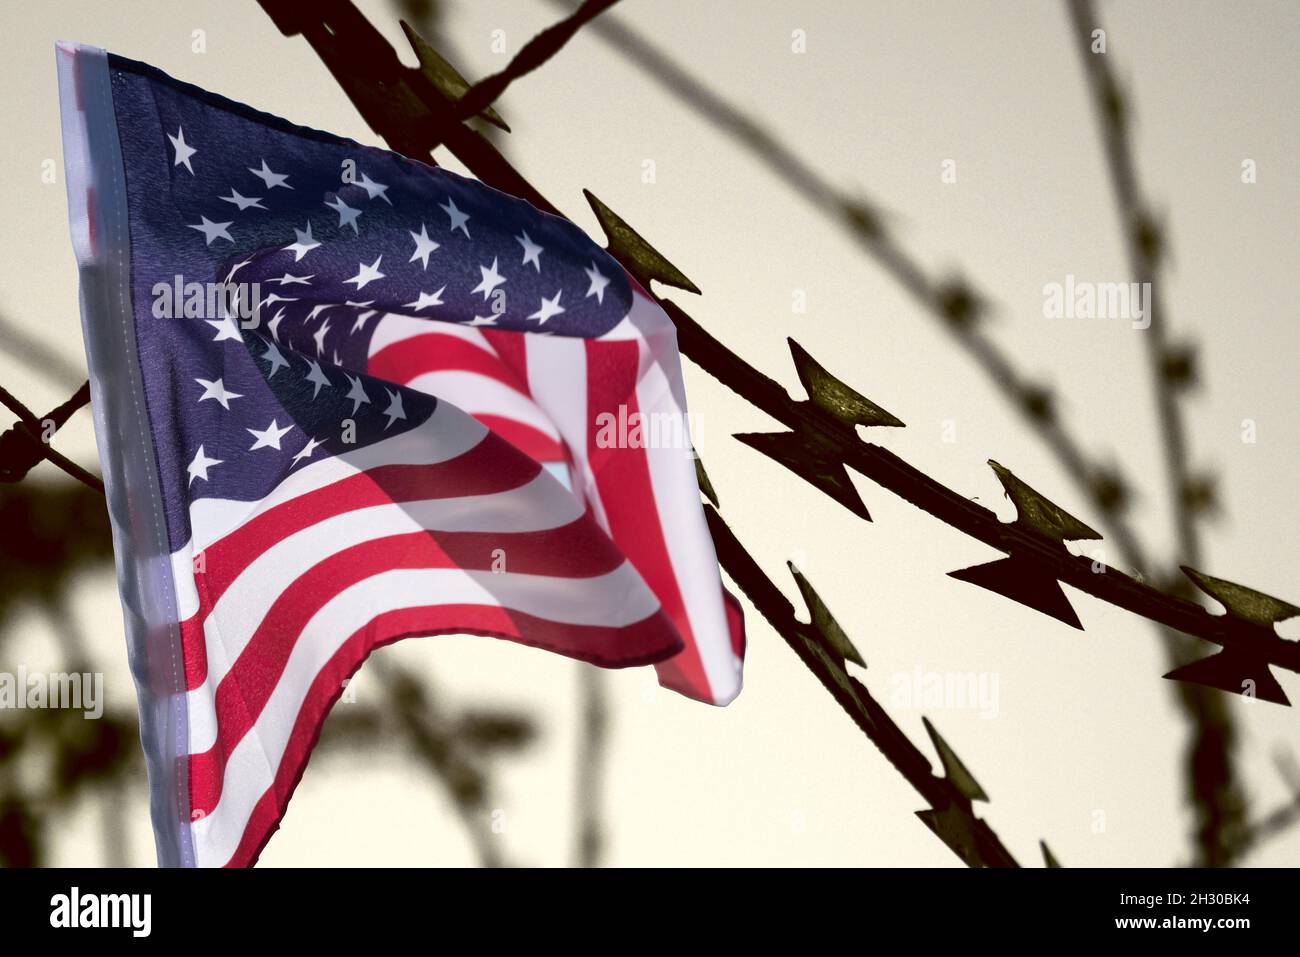 United States flag and barbed wire Stock Photo